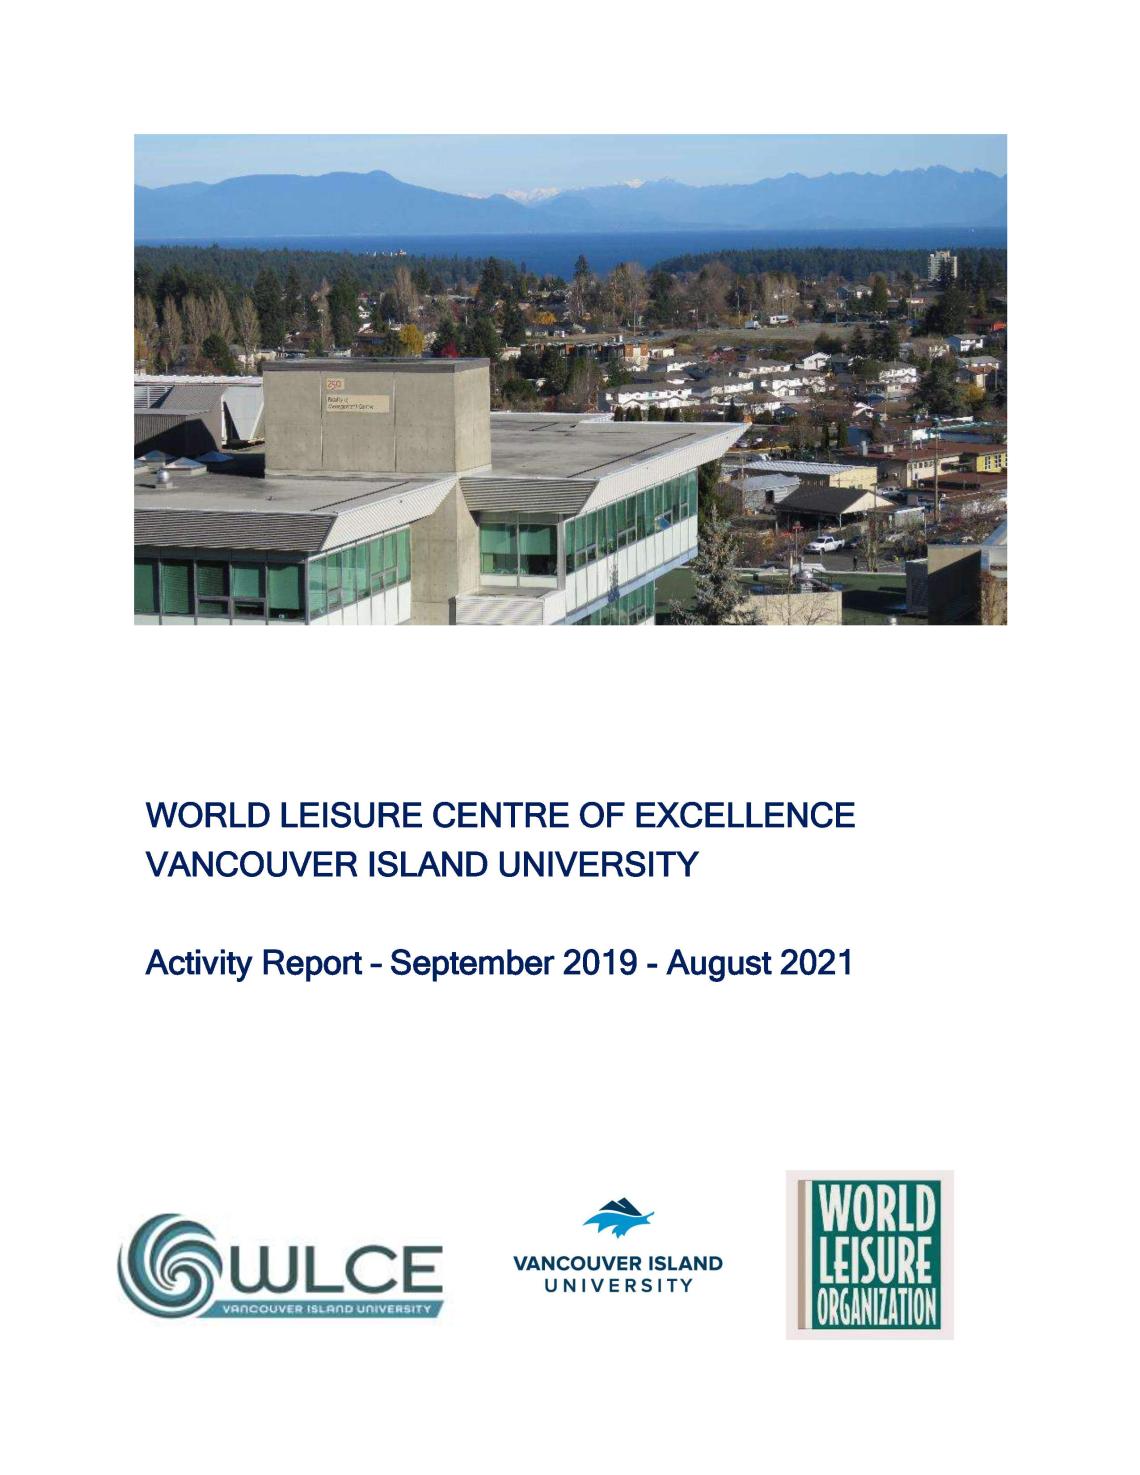 WLCE Report cover